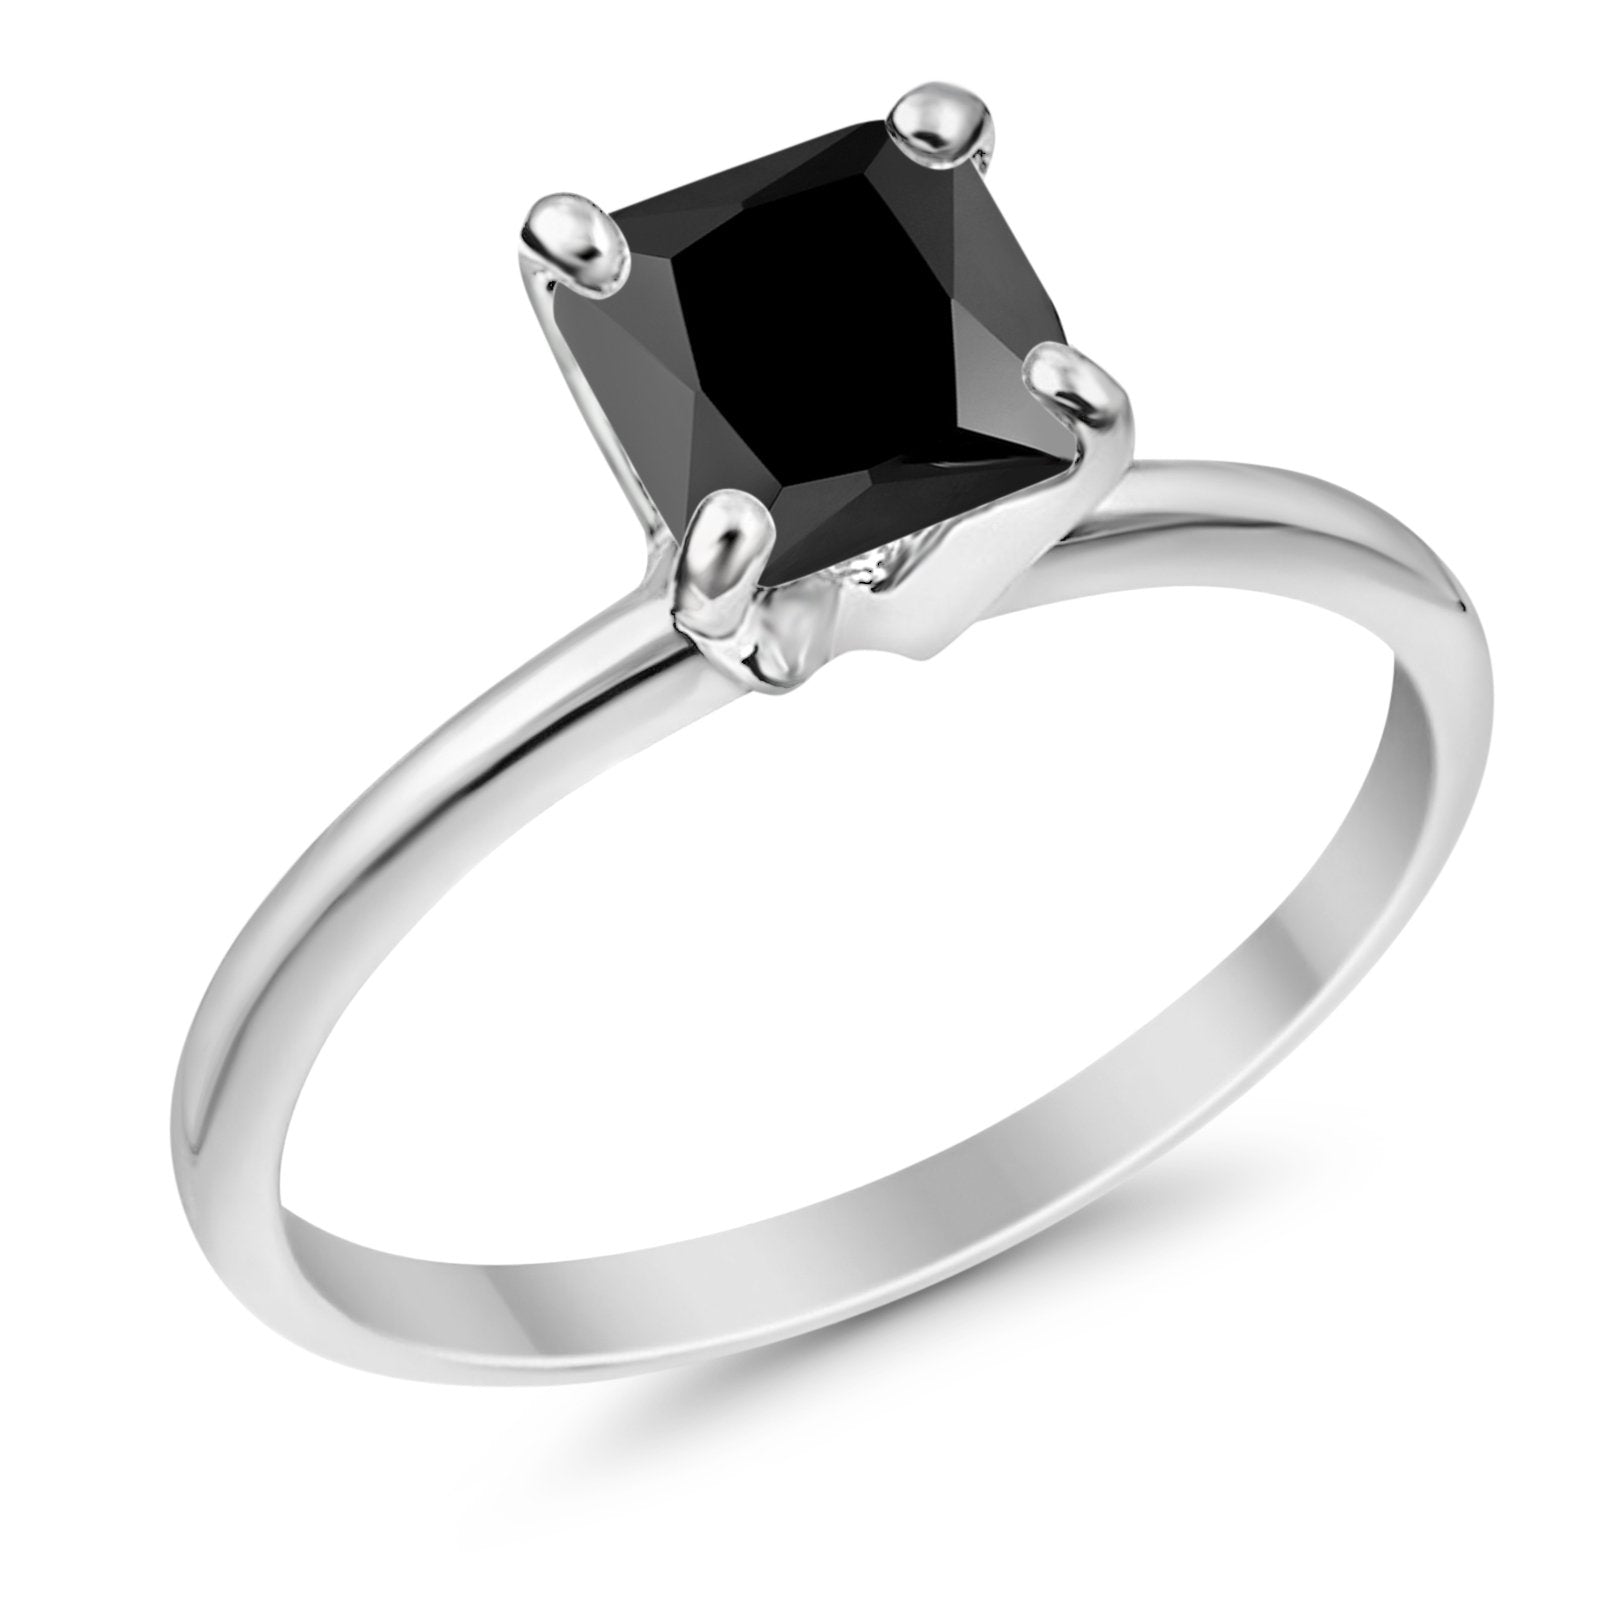 Solitaire Wedding Engagement Ring Princess Cut Simulated Black CZ 925 Sterling Silver